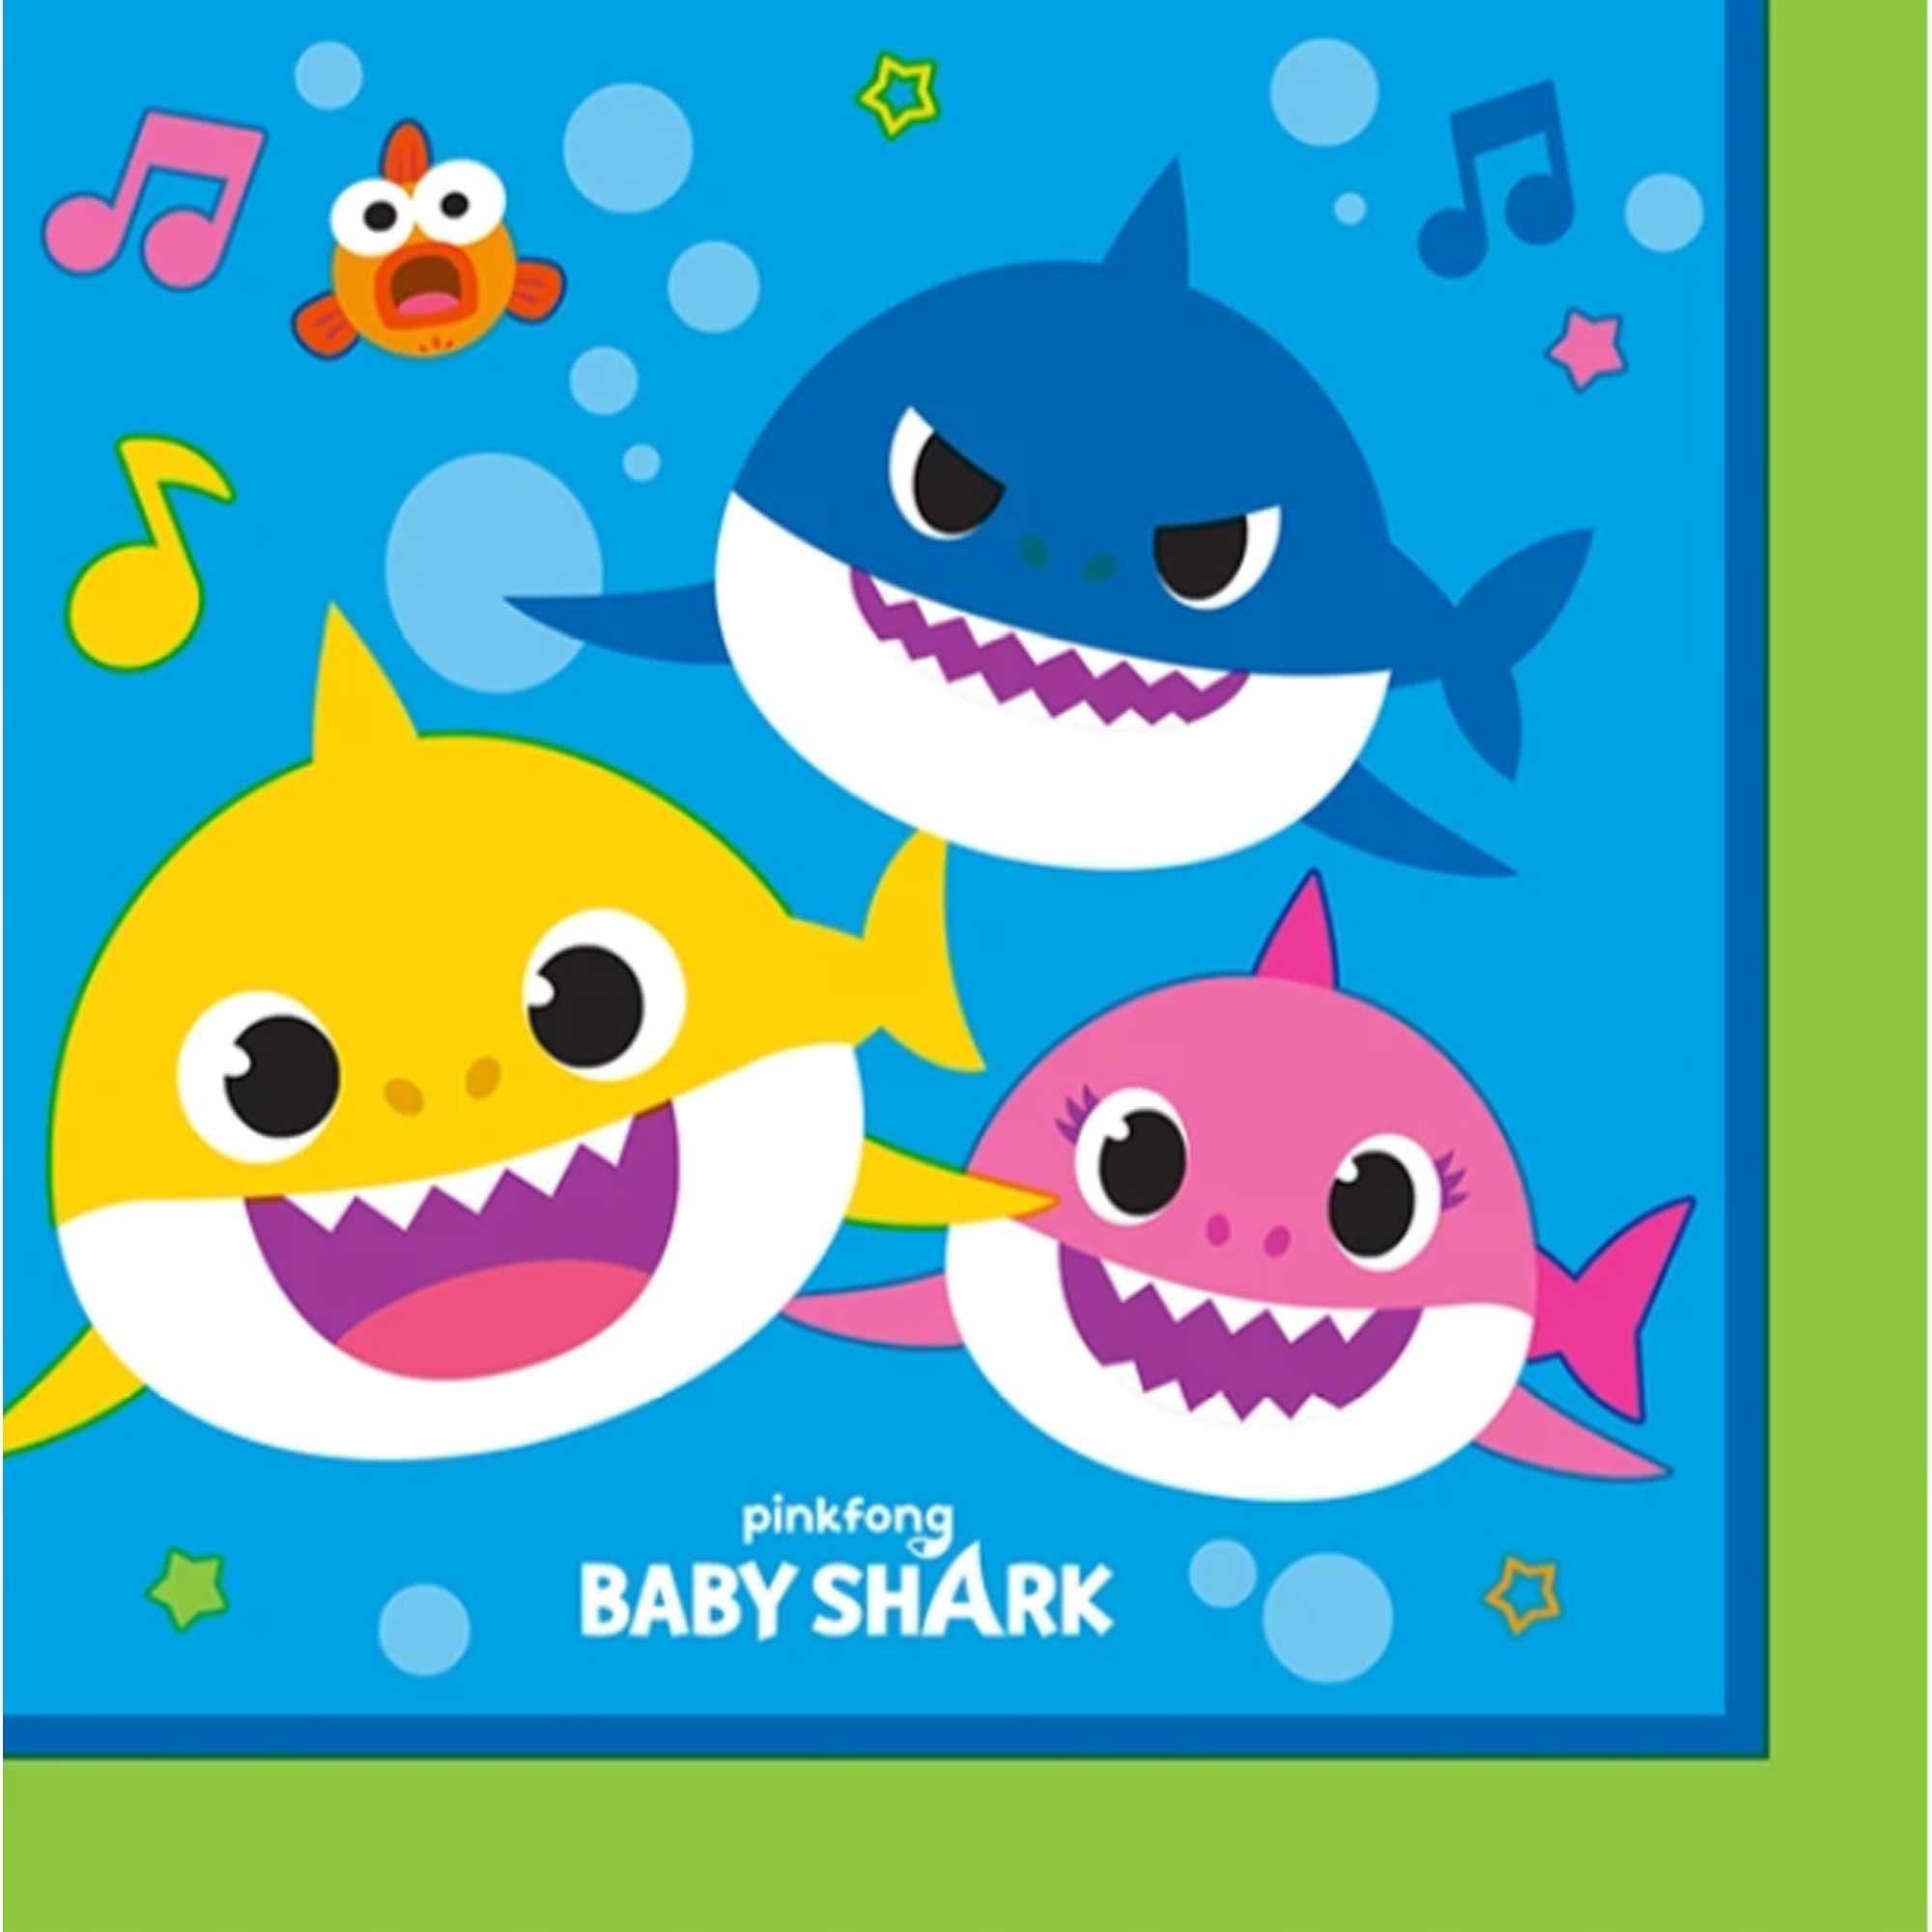 Make any child's birthday a splash with Party Empress' Baby Shark party supplies! Dive into the ultimate celebration with Baby Shark themed decorations!